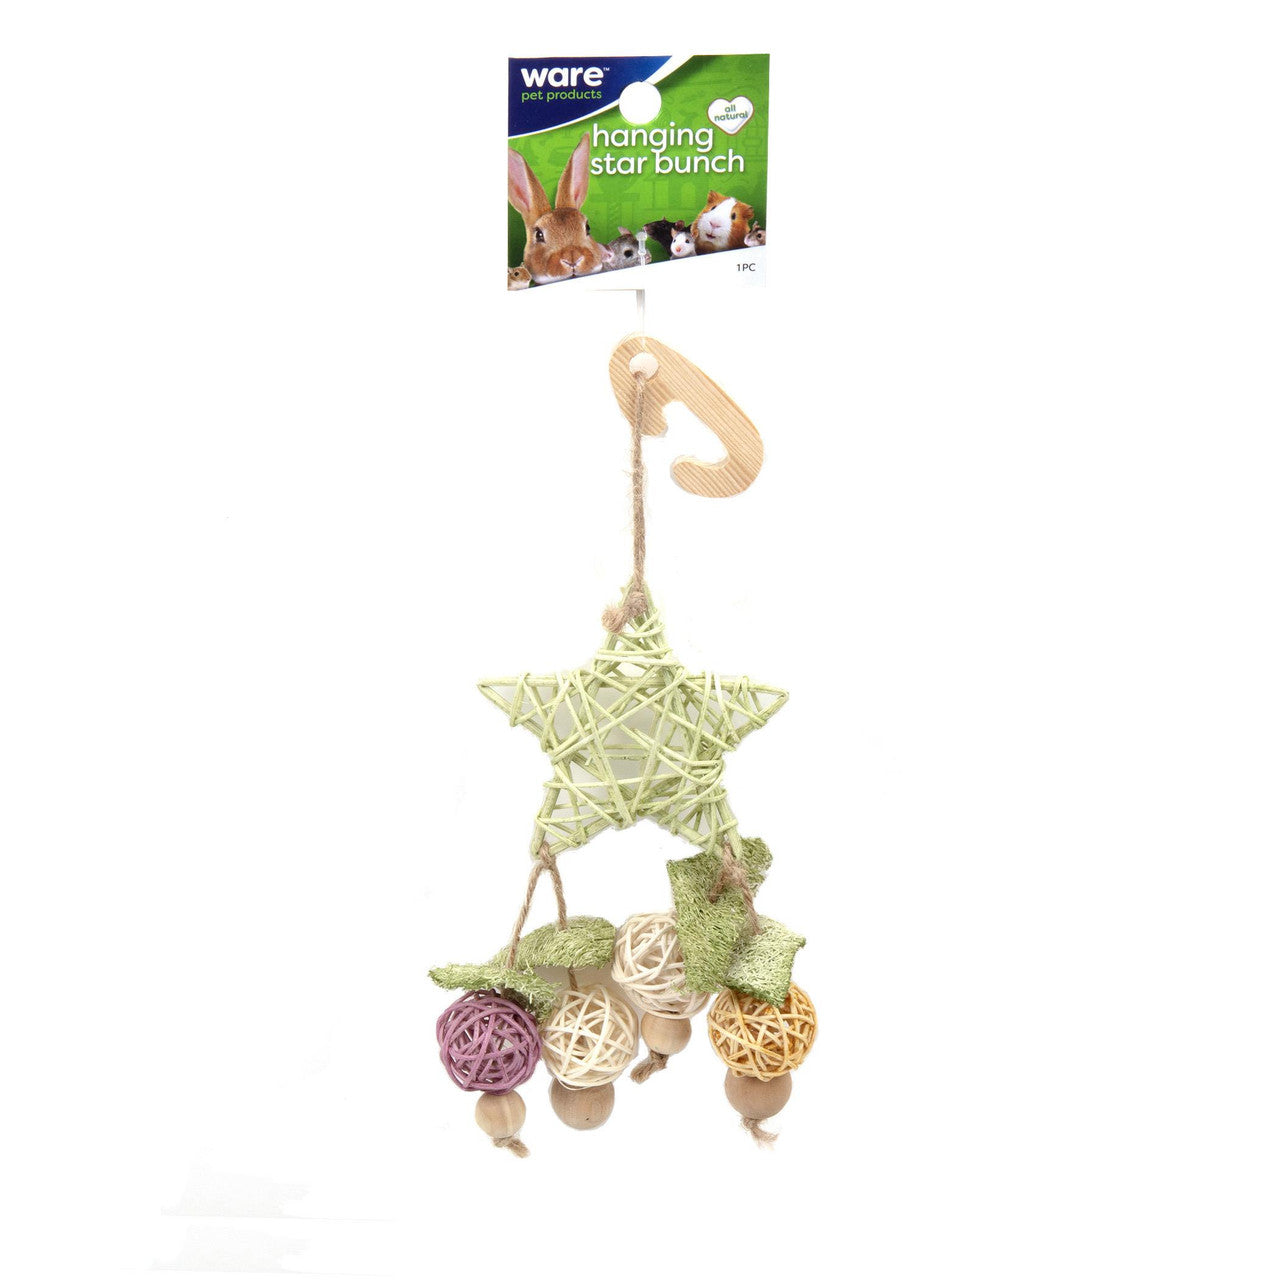 Ware Hanging Star Bunch Toy 791611103036